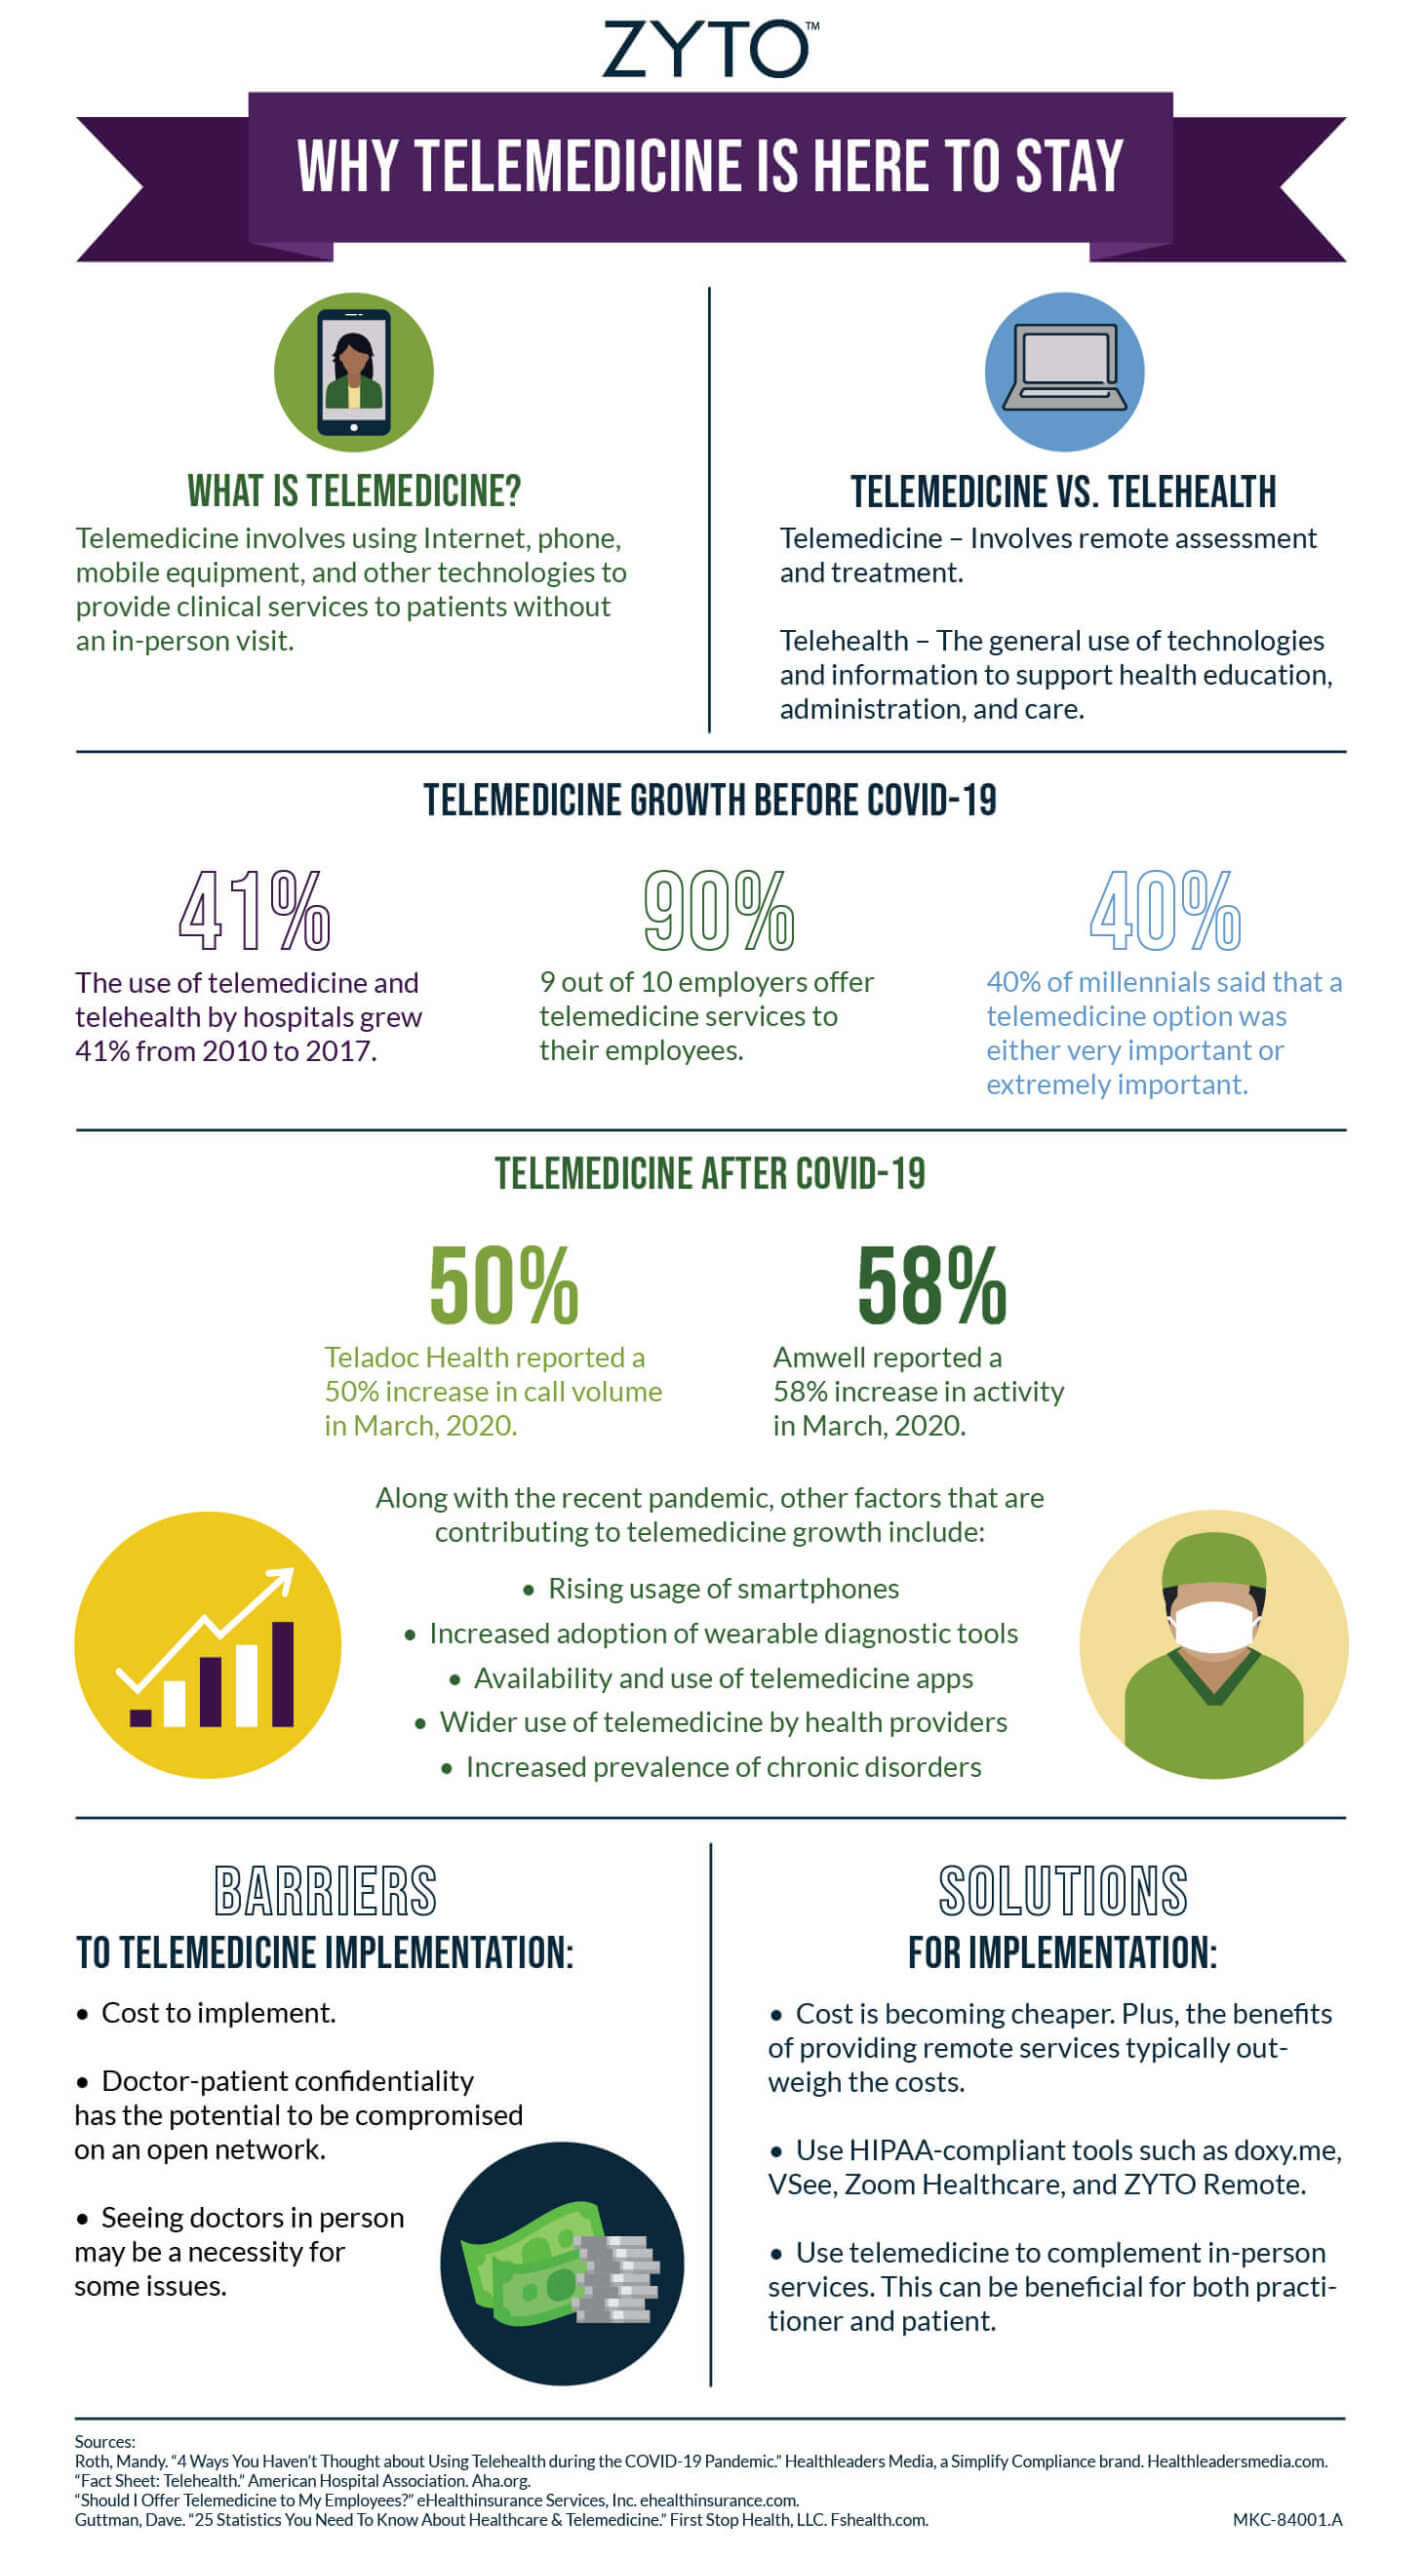 why telemedicine is here to stay infographic